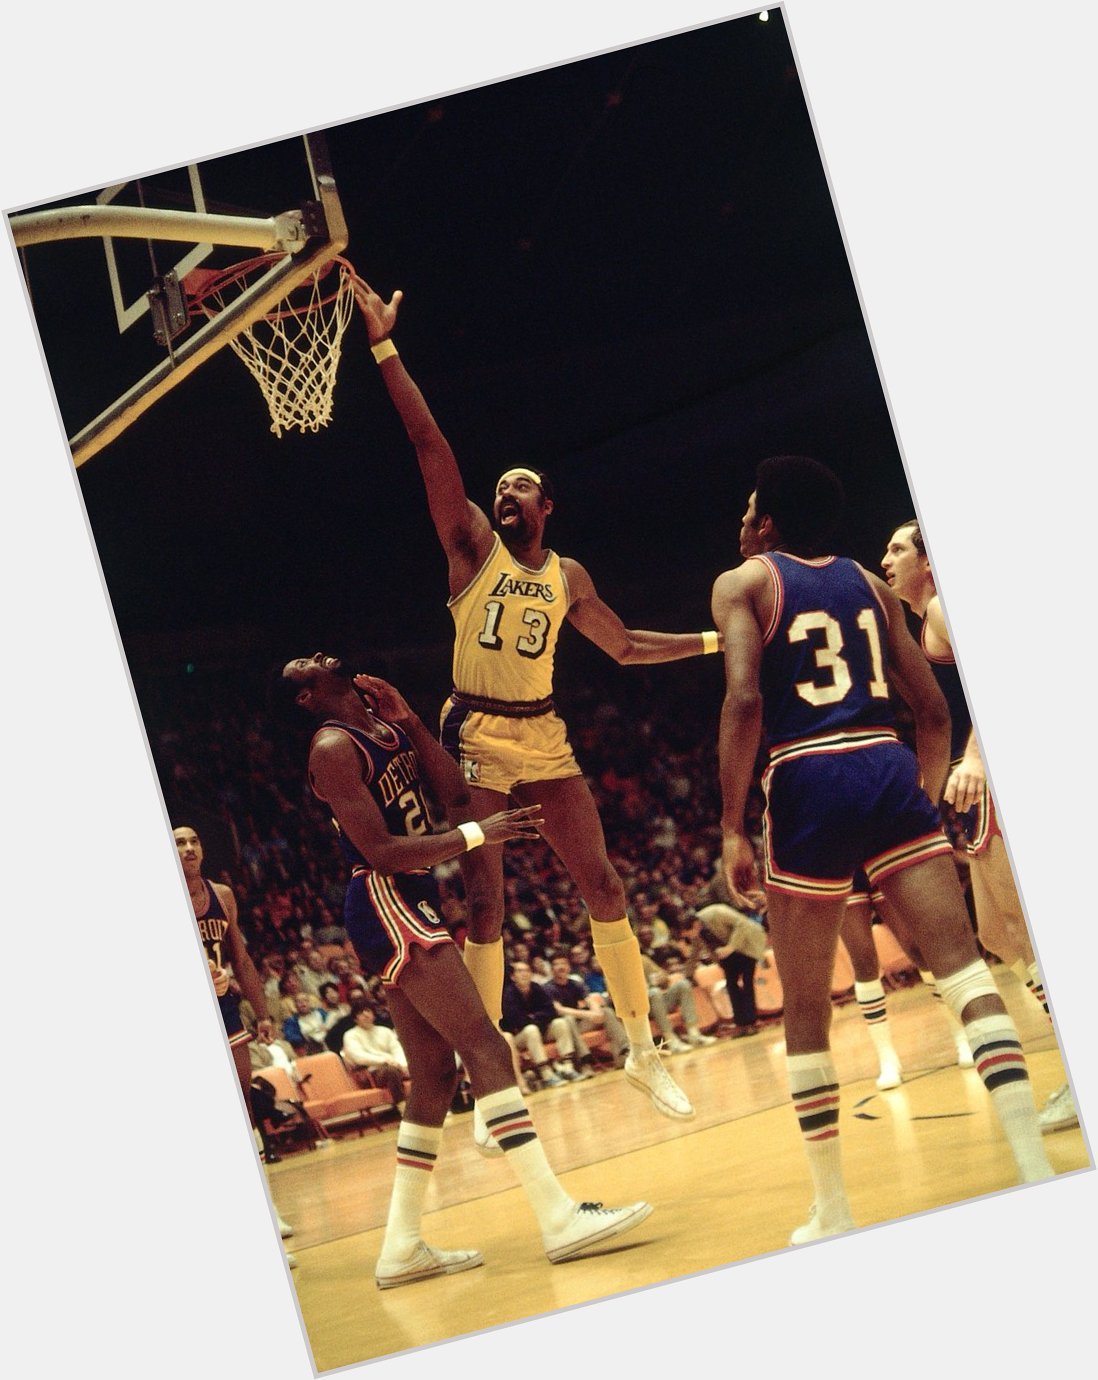 Happy Birthday to an the late great Wilt Chamberlain! 